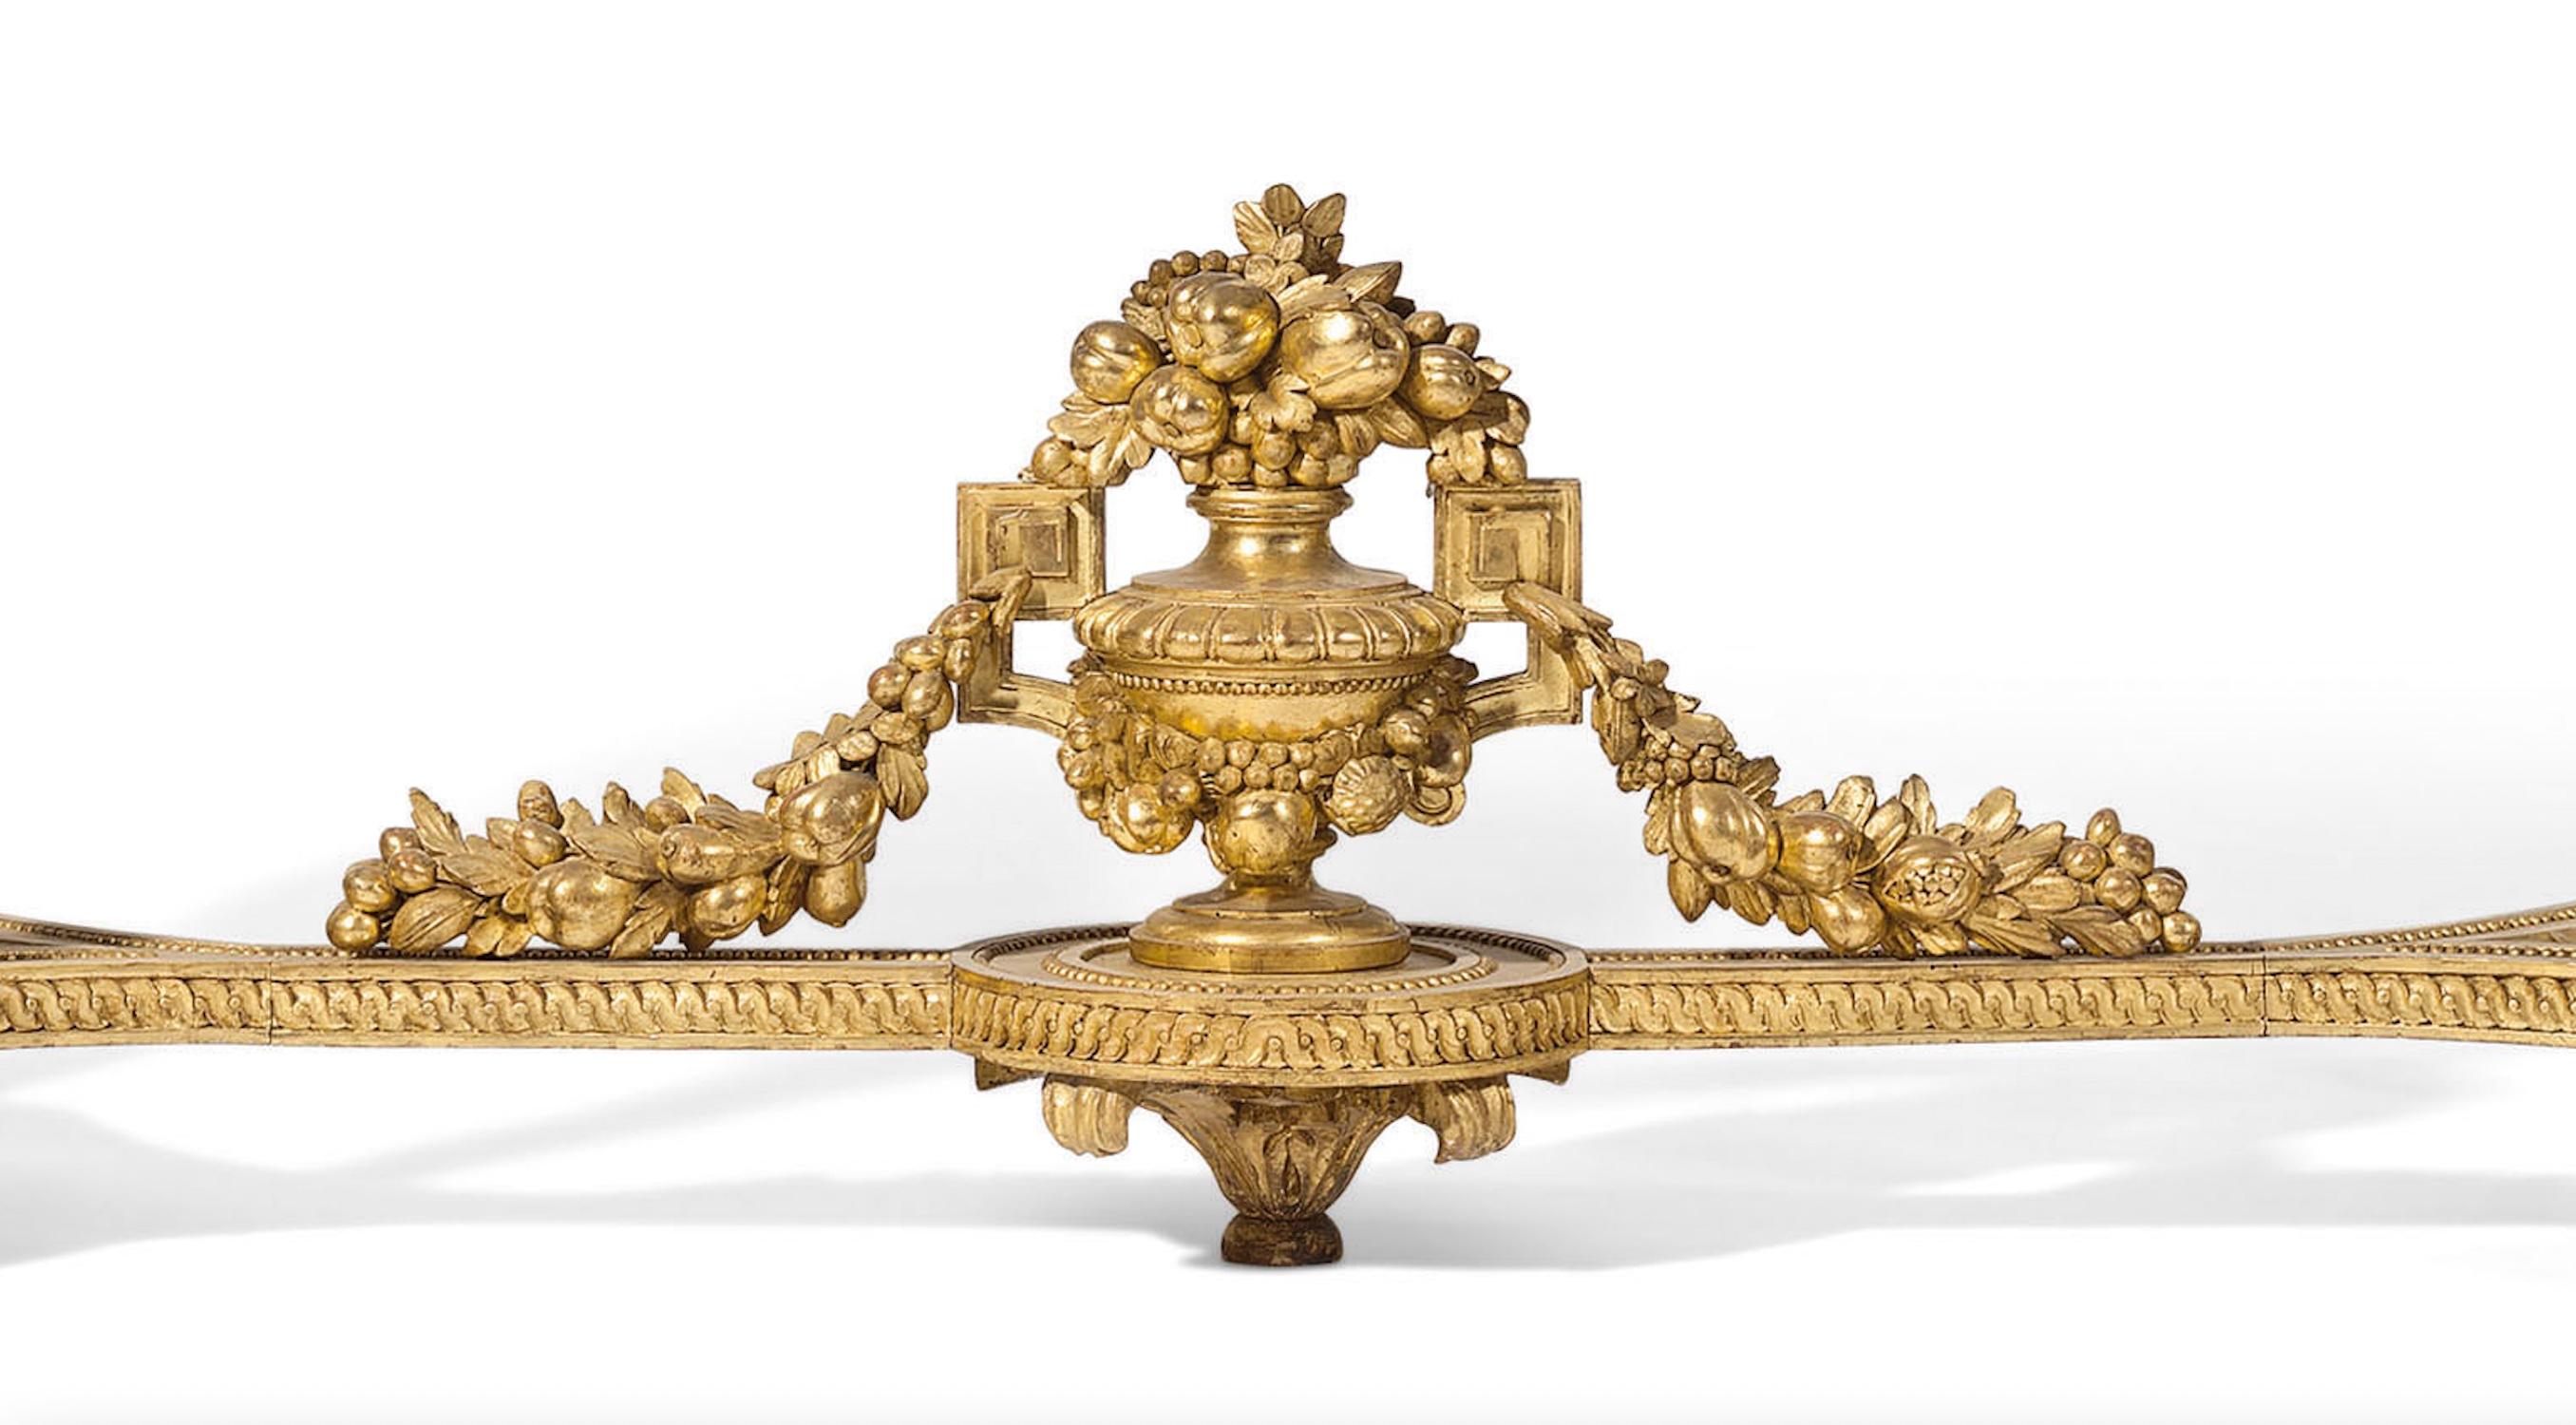 ITEM: A FRENCH GILTWOOD CONSOLE
SPECIAL FEATURES: OF LOUIS XVI STYLE
MATERIAL: GILTWOOD
PERIOD: LATE 19TH CENTURY

